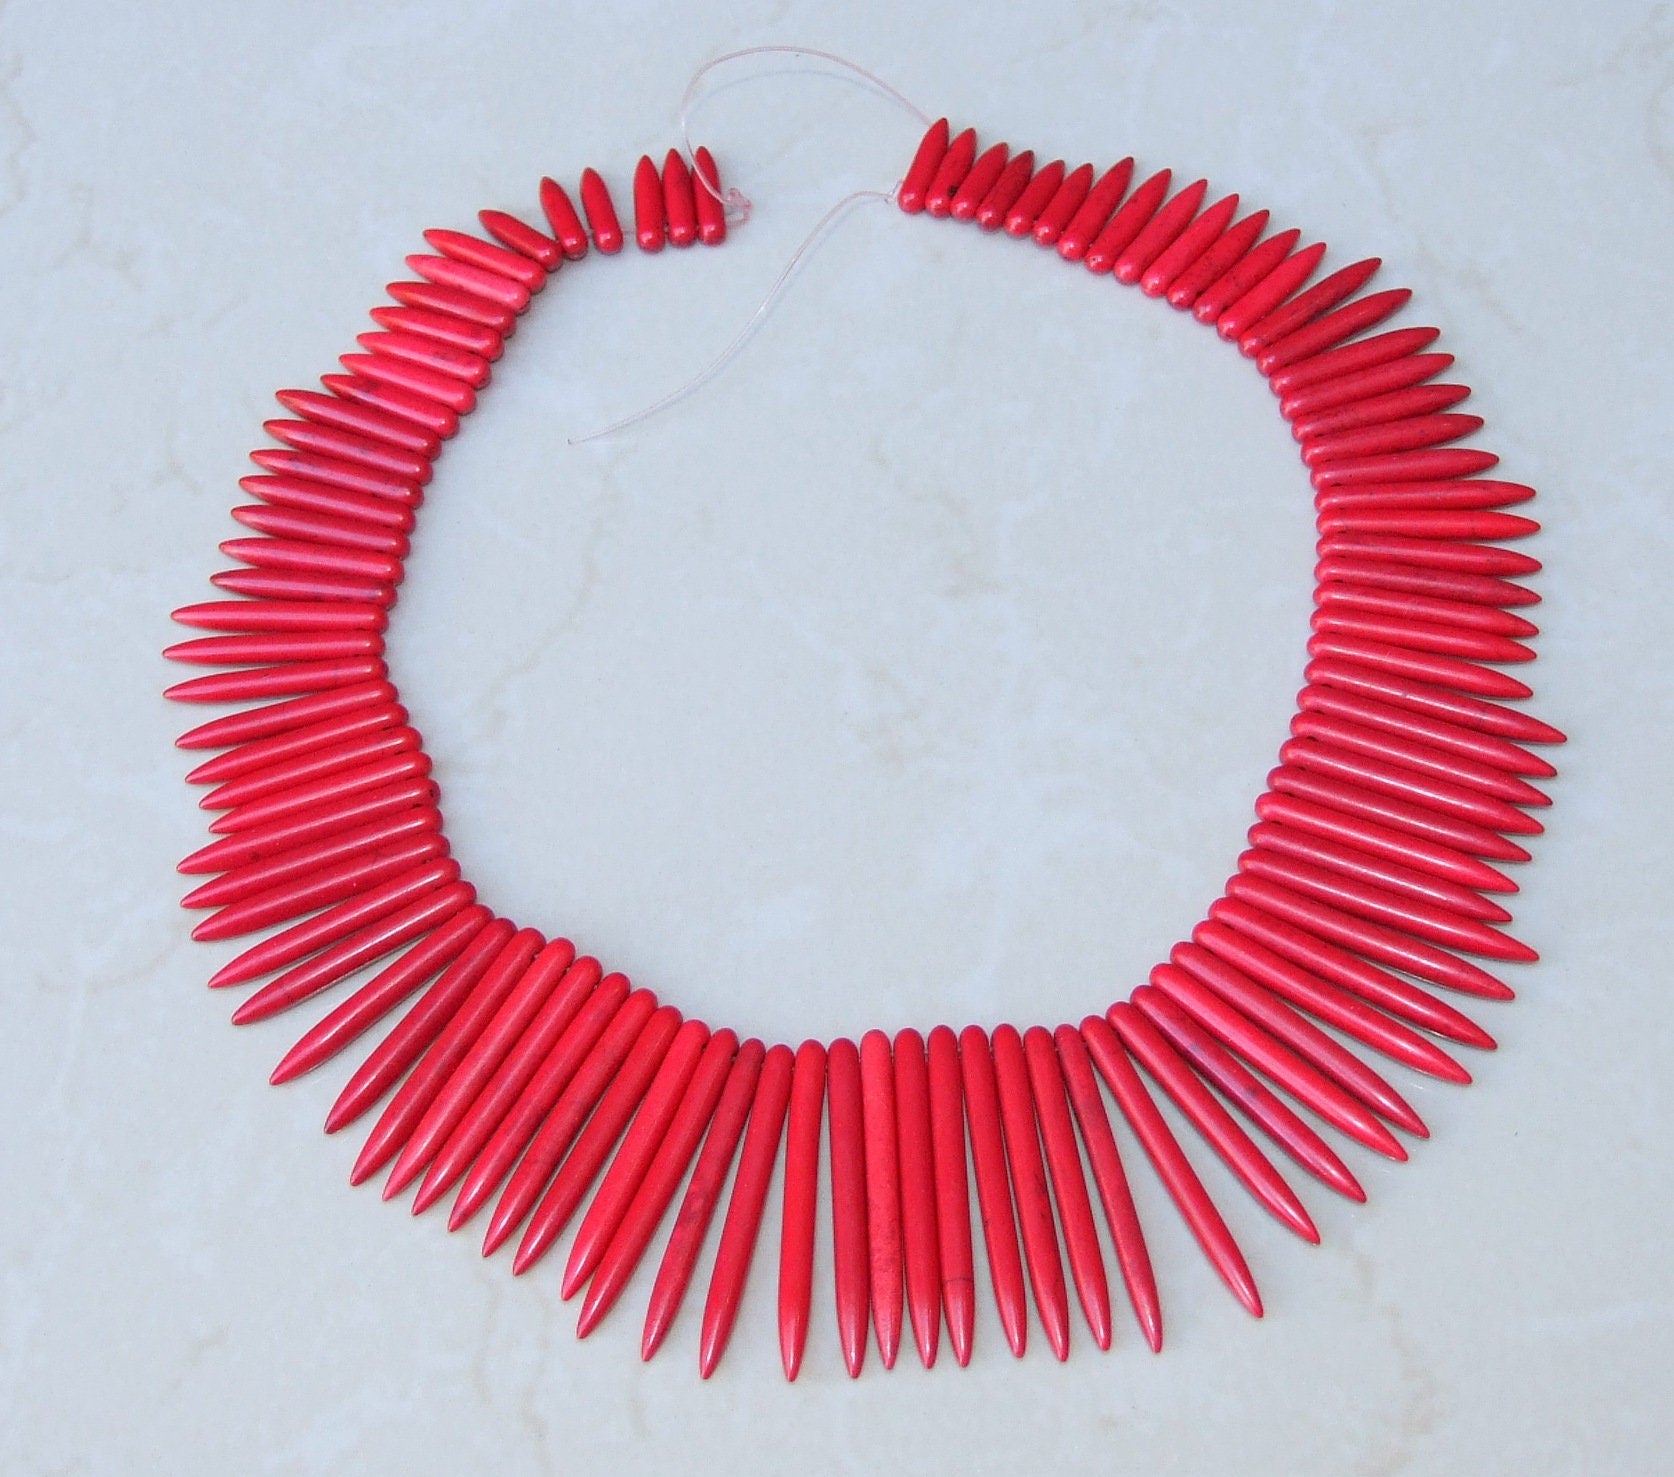 Red Turquoise, Spike Beads, Spike Collar, Spike Choker Necklace, Turquoise Spike Necklace, Statement Necklace, Spike Bib Necklace, 20-50mm